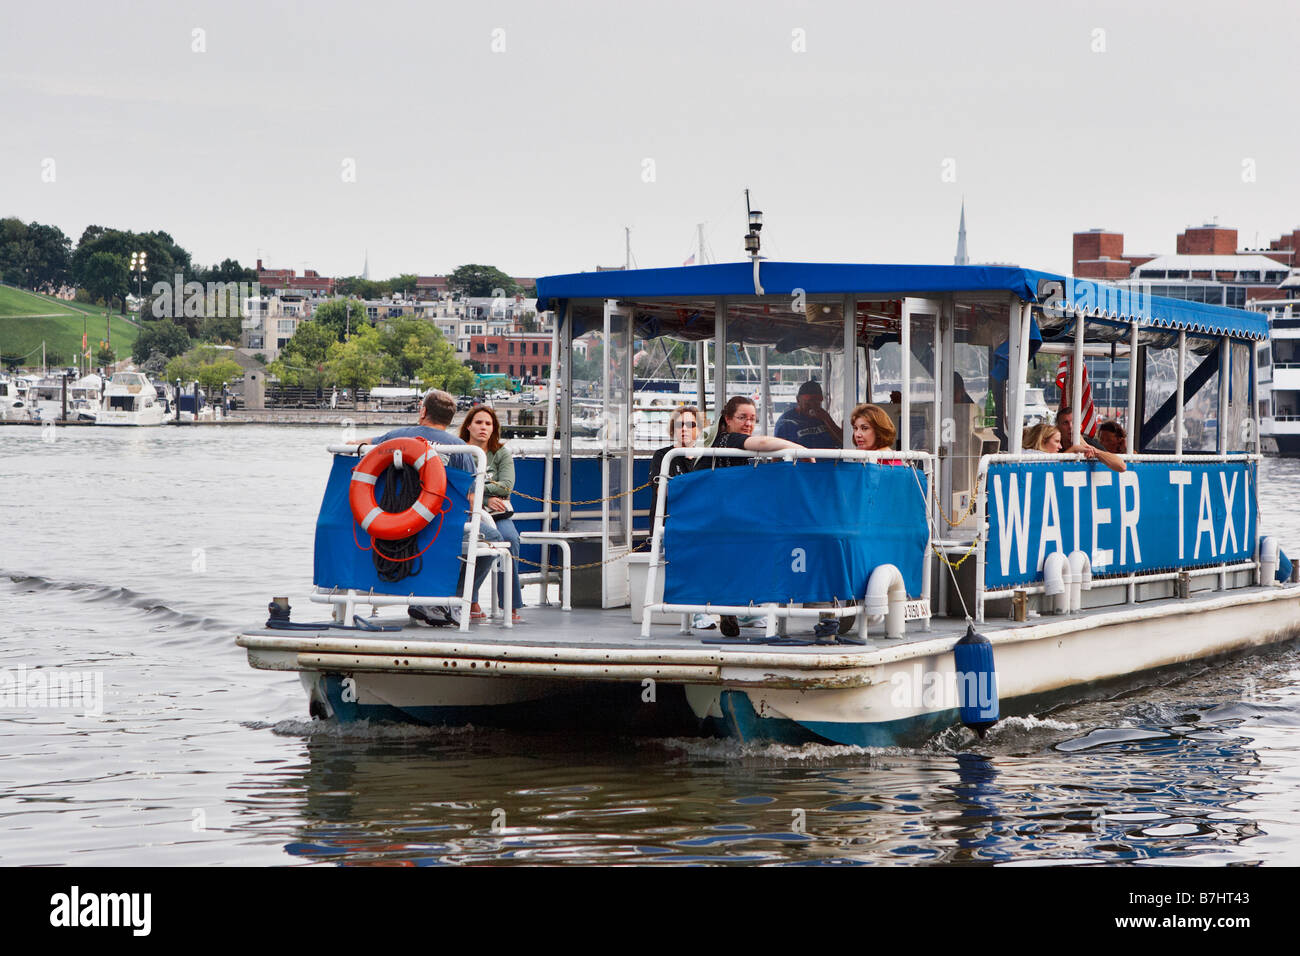 A water taxi approaches its pier on the Inner Harbor Baltimore Maryland Stock Photo